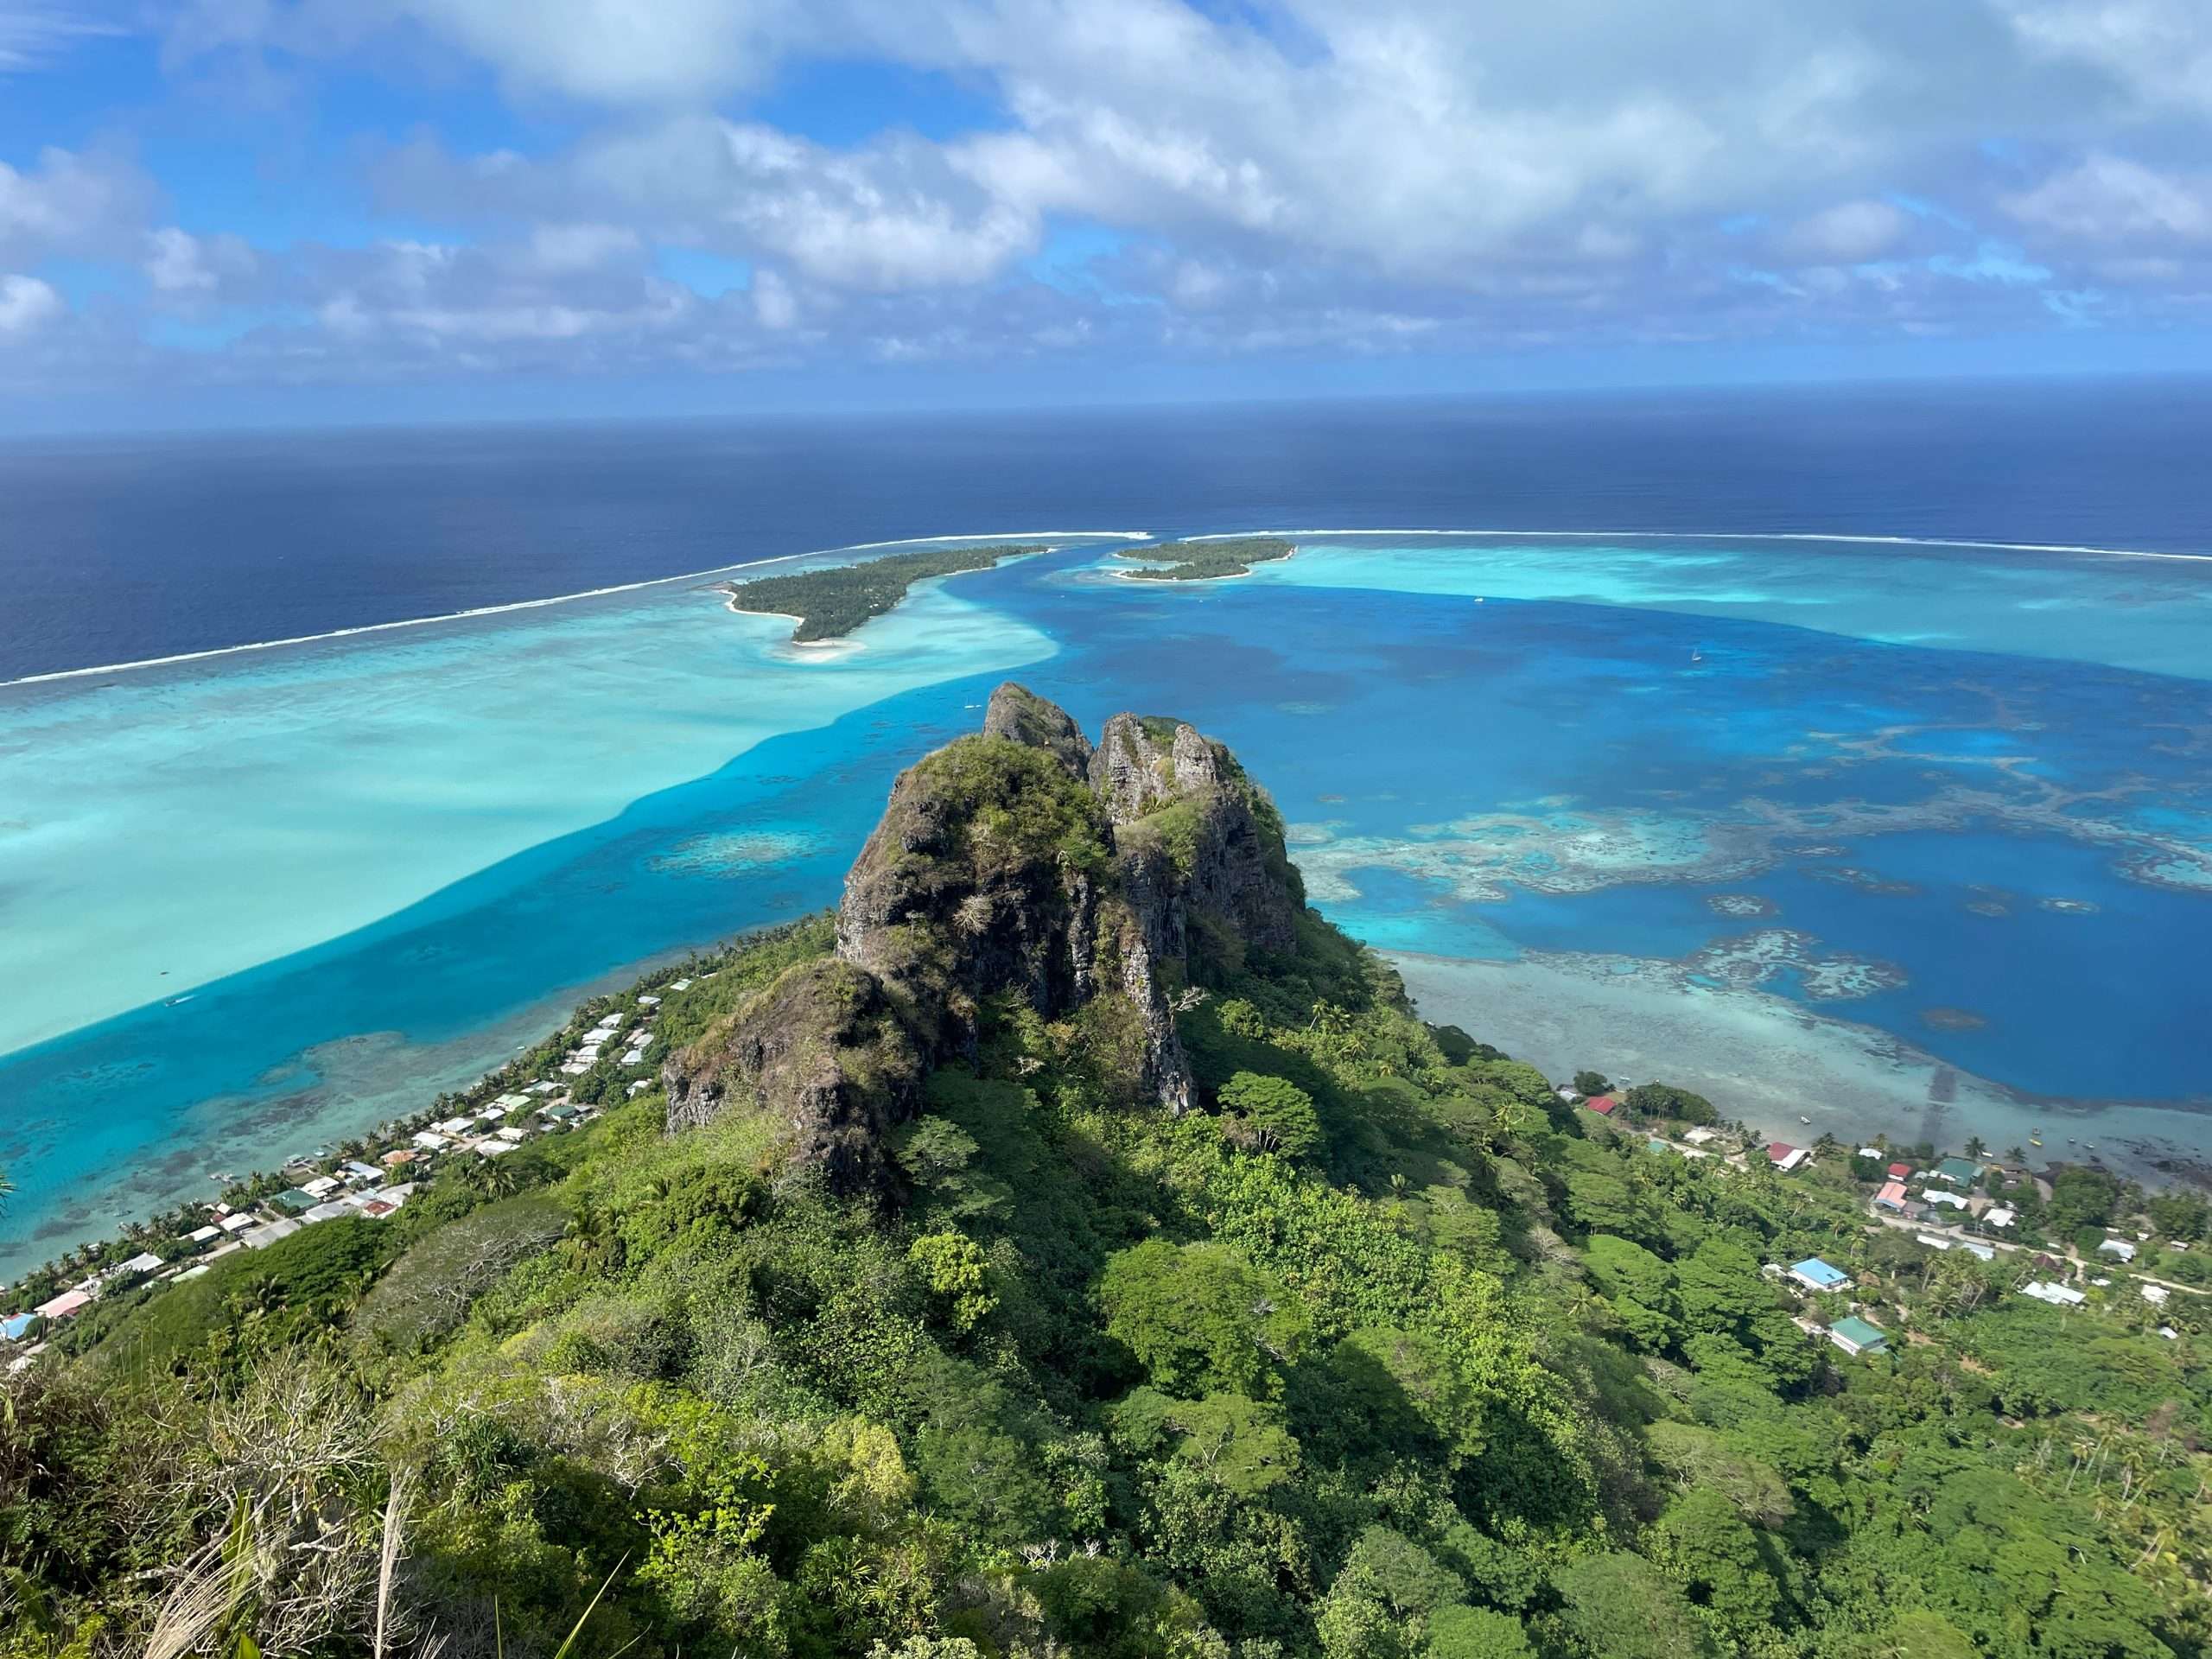 discover the breathtaking beauty of tahiti on a memorable cruise through crystal-clear waters and pristine islands.